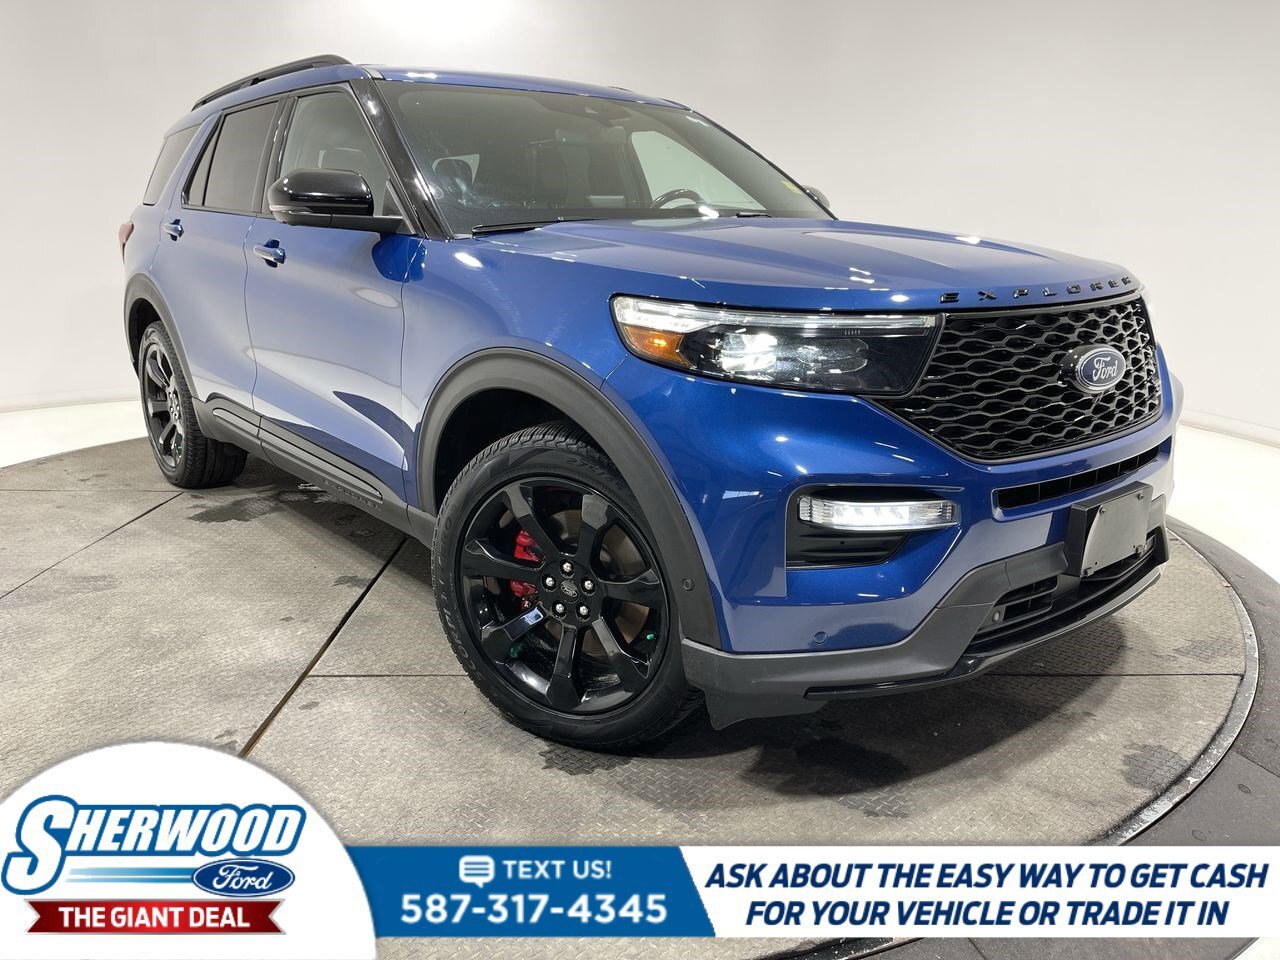 2020 Ford Explorer ST 4WD - $0 Down $185 Weekly - CLEAN CARFAX